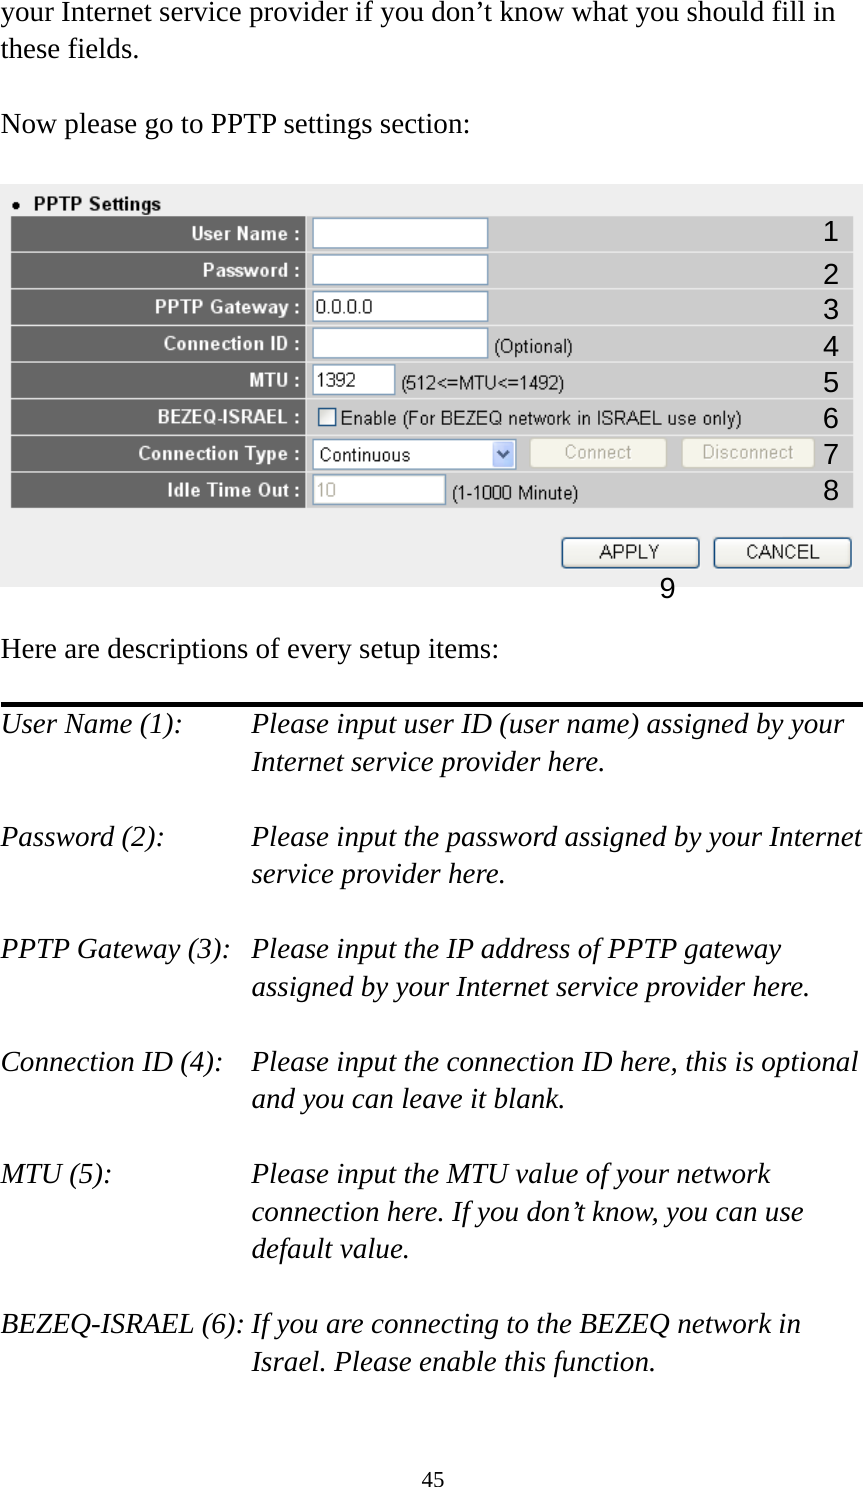 45 your Internet service provider if you don’t know what you should fill in these fields.  Now please go to PPTP settings section:    Here are descriptions of every setup items:  User Name (1):    Please input user ID (user name) assigned by your Internet service provider here.  Password (2):    Please input the password assigned by your Internet service provider here.  PPTP Gateway (3):   Please input the IP address of PPTP gateway assigned by your Internet service provider here.  Connection ID (4):    Please input the connection ID here, this is optional and you can leave it blank.  MTU (5):    Please input the MTU value of your network connection here. If you don’t know, you can use default value.  BEZEQ-ISRAEL (6): If you are connecting to the BEZEQ network in Israel. Please enable this function.  123 4 5 7 8 96 